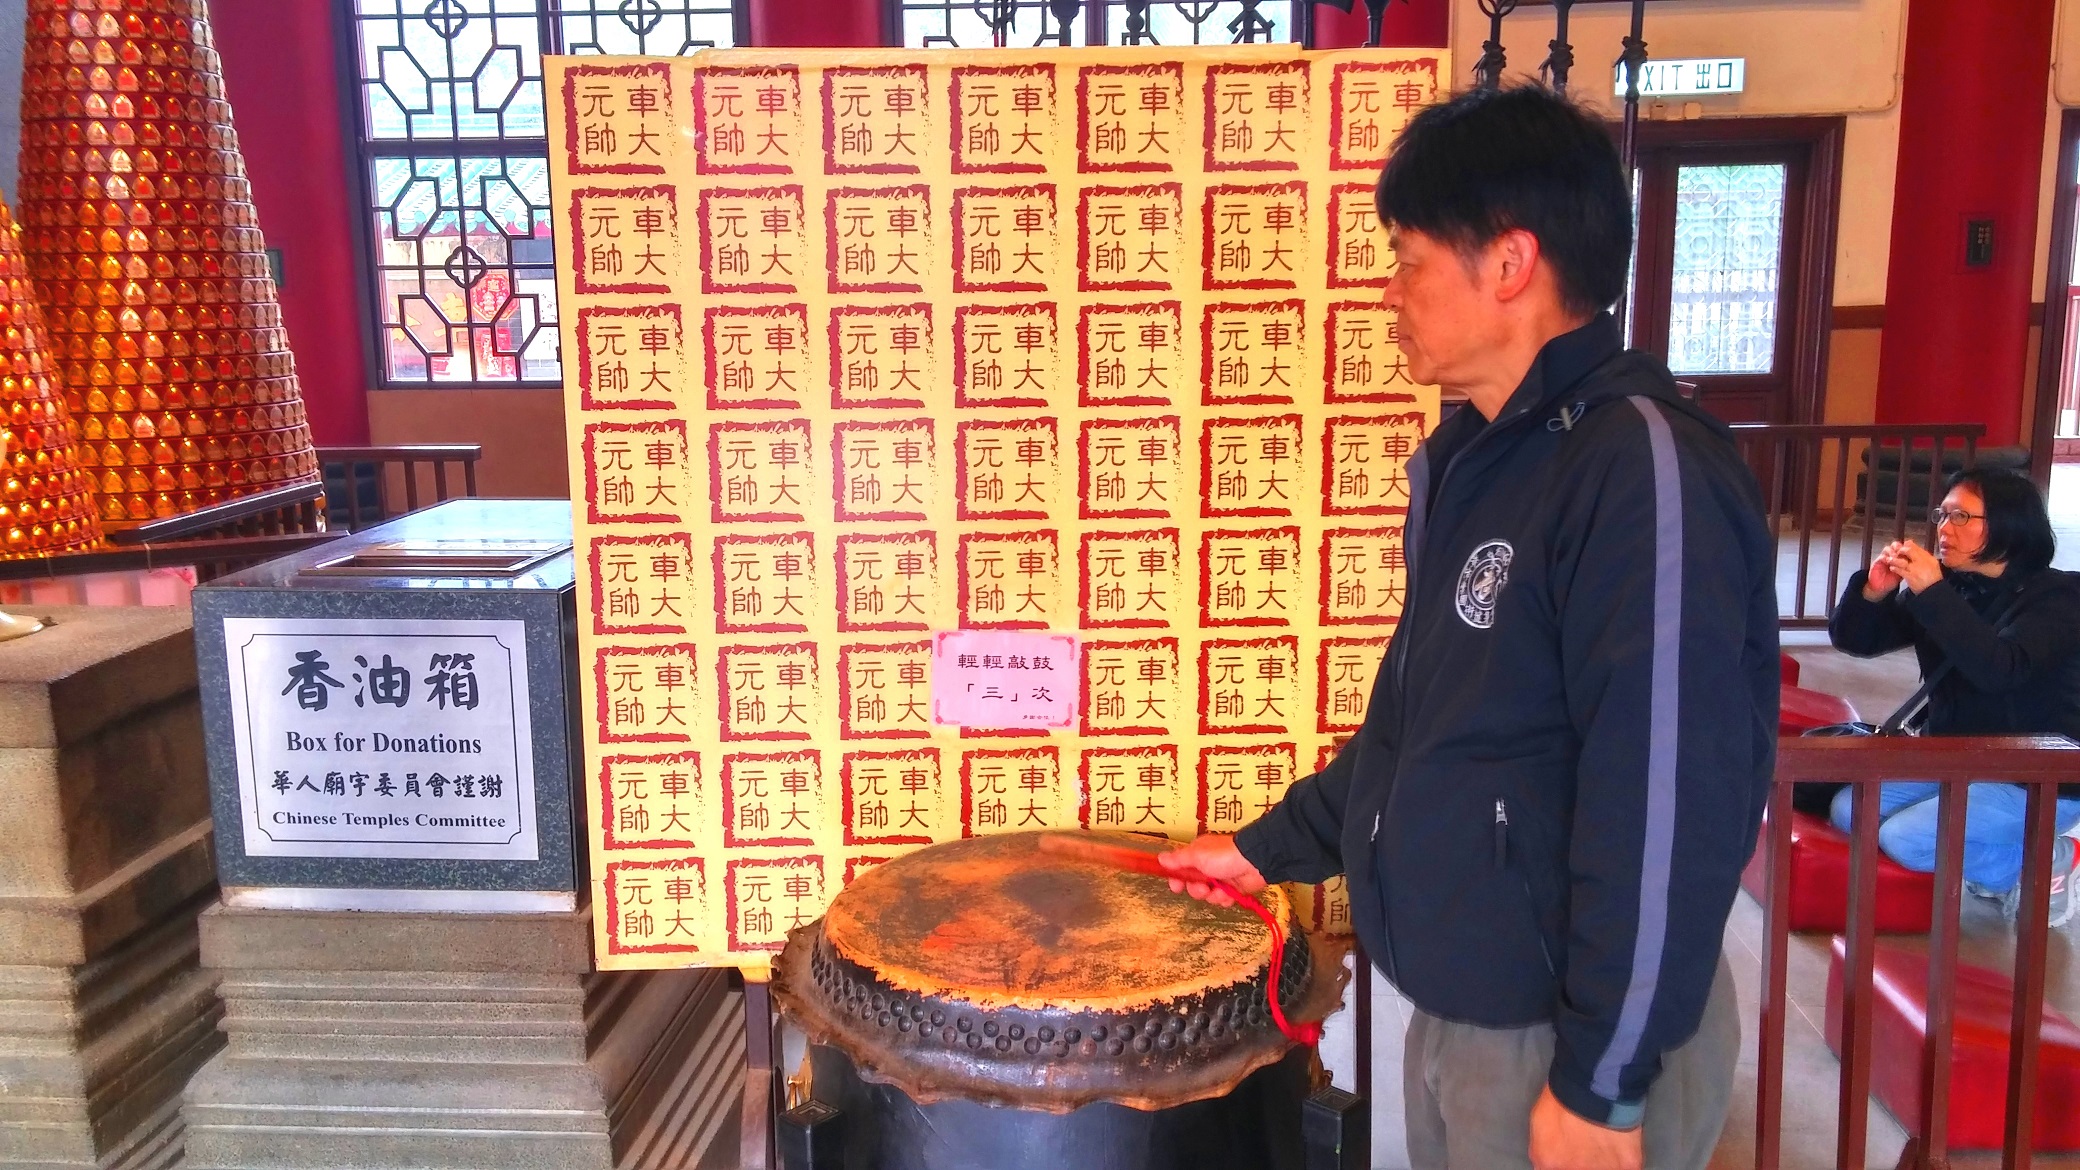 hit drum in Che Kung Temple